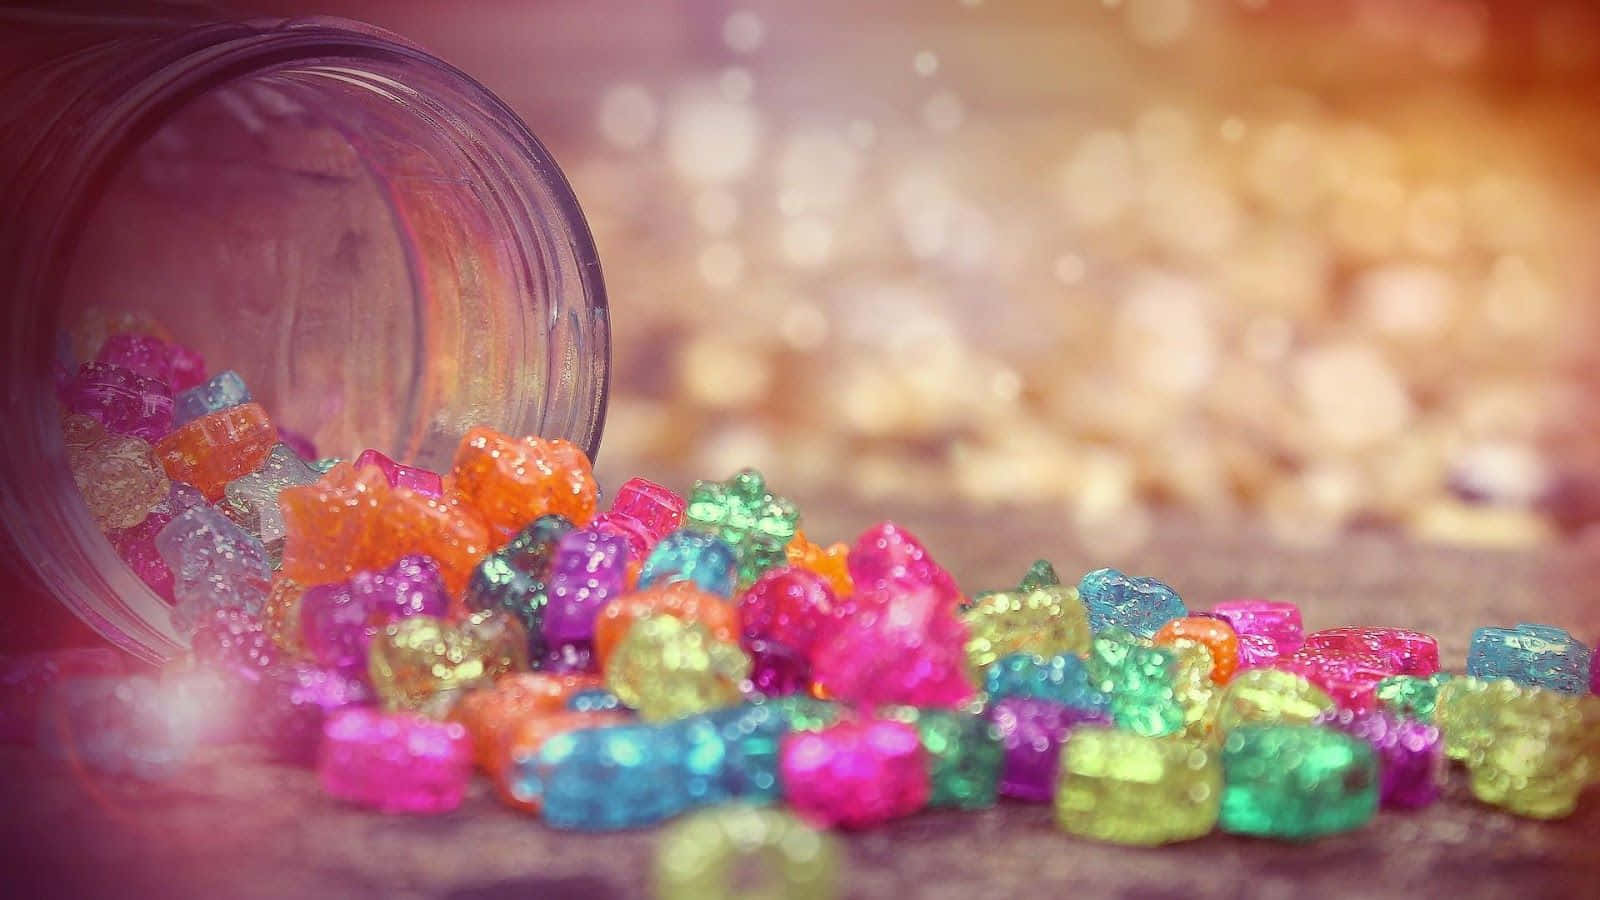 A Jar Of Colorful Candy Sitting On The Ground